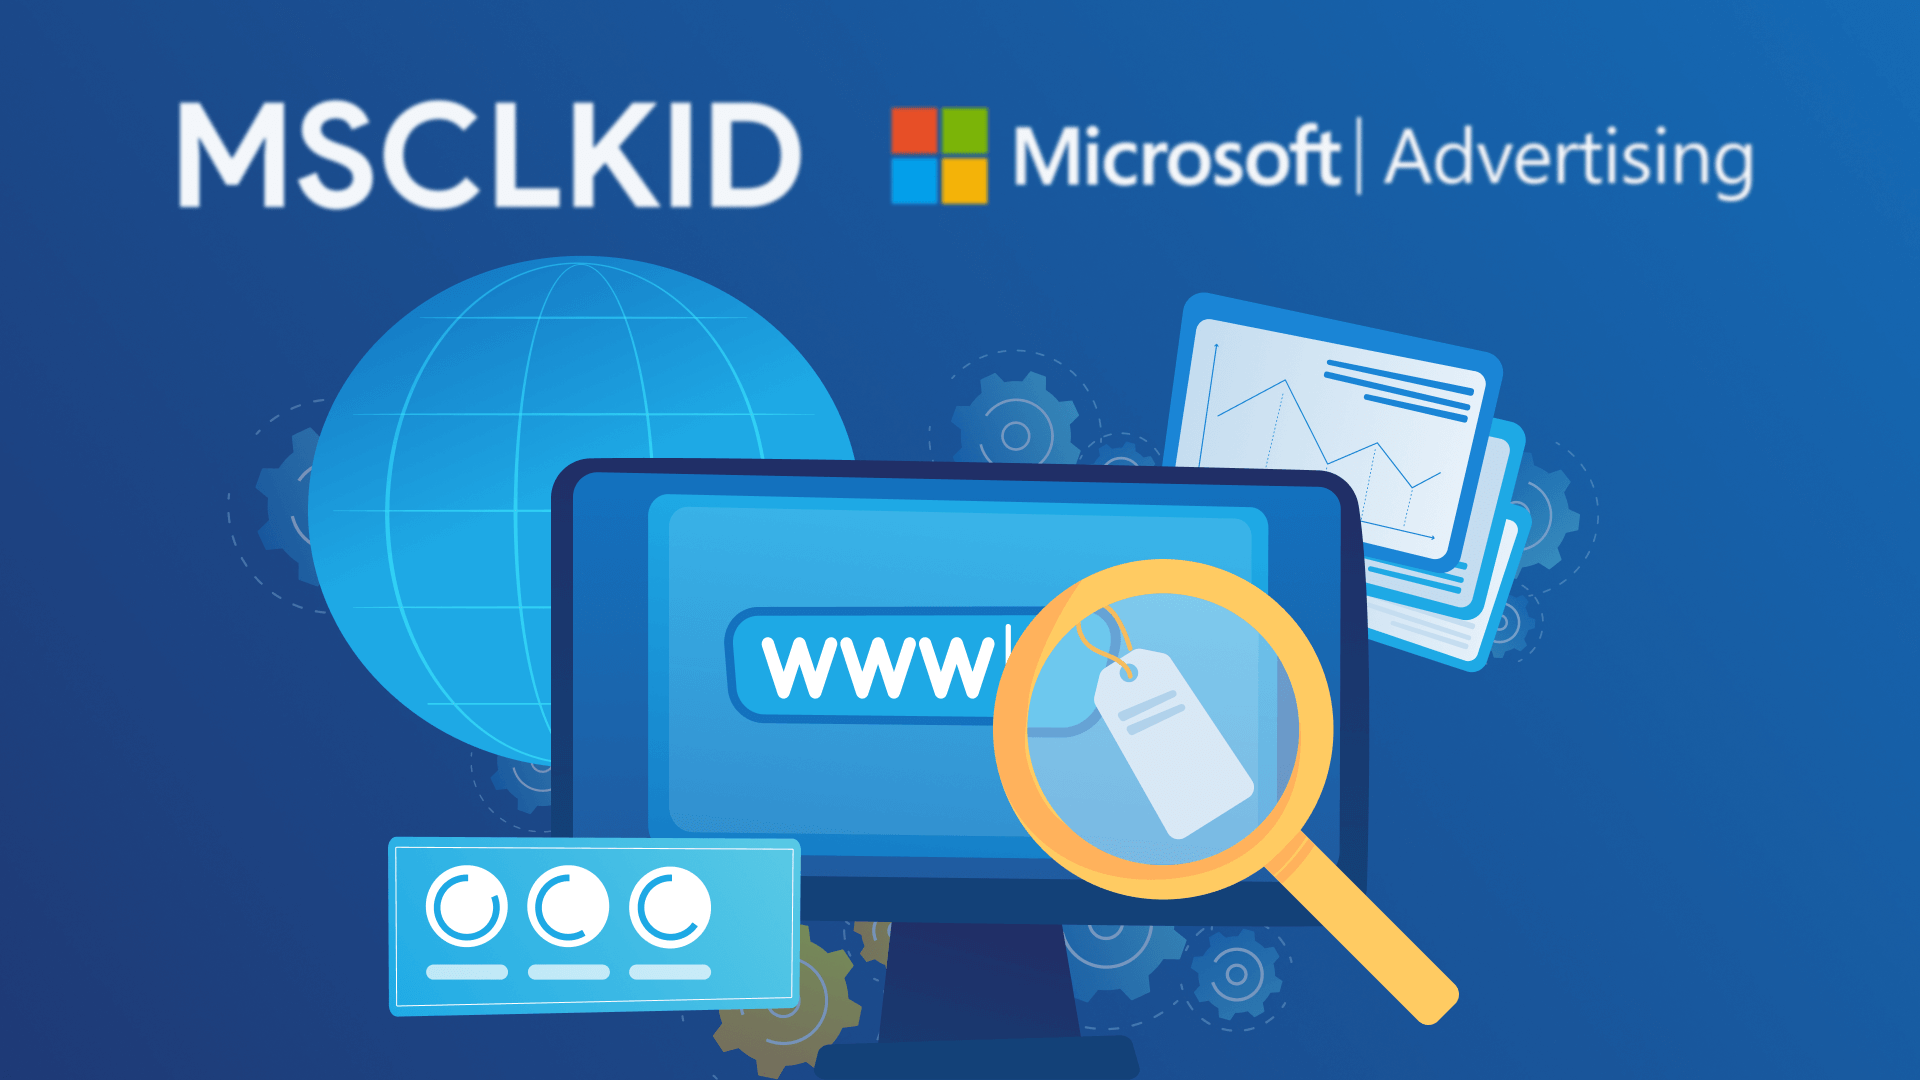 How to enable MSCLKID tracking with auto-tagging in Microsoft Ads